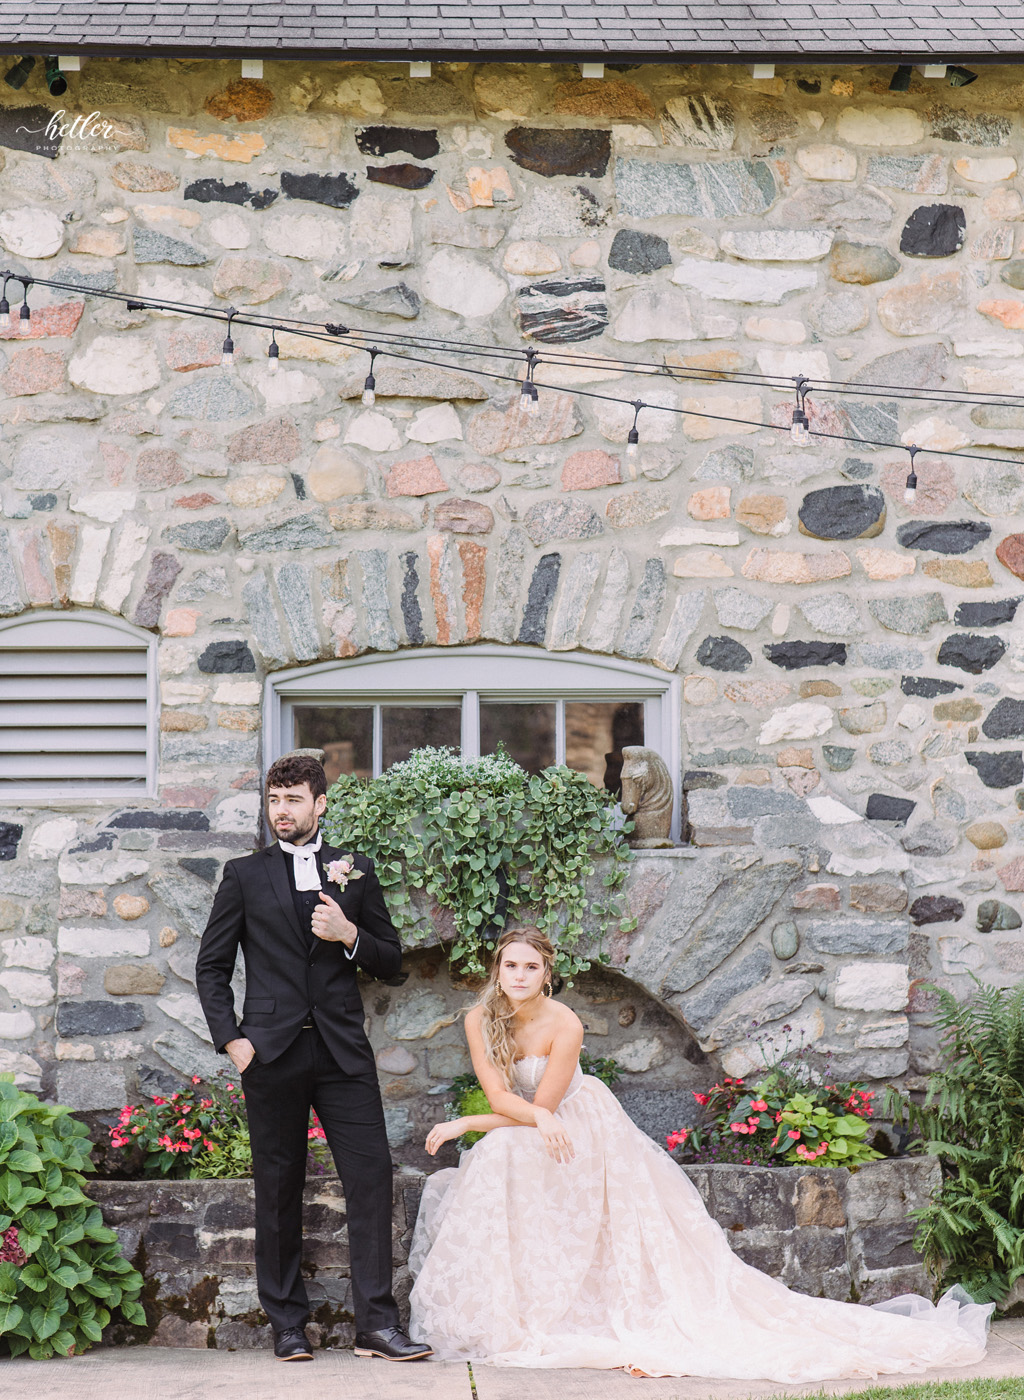 Wedding inspiration at Castle Farms in Charlevoix Michigan with a Jane Austen theme